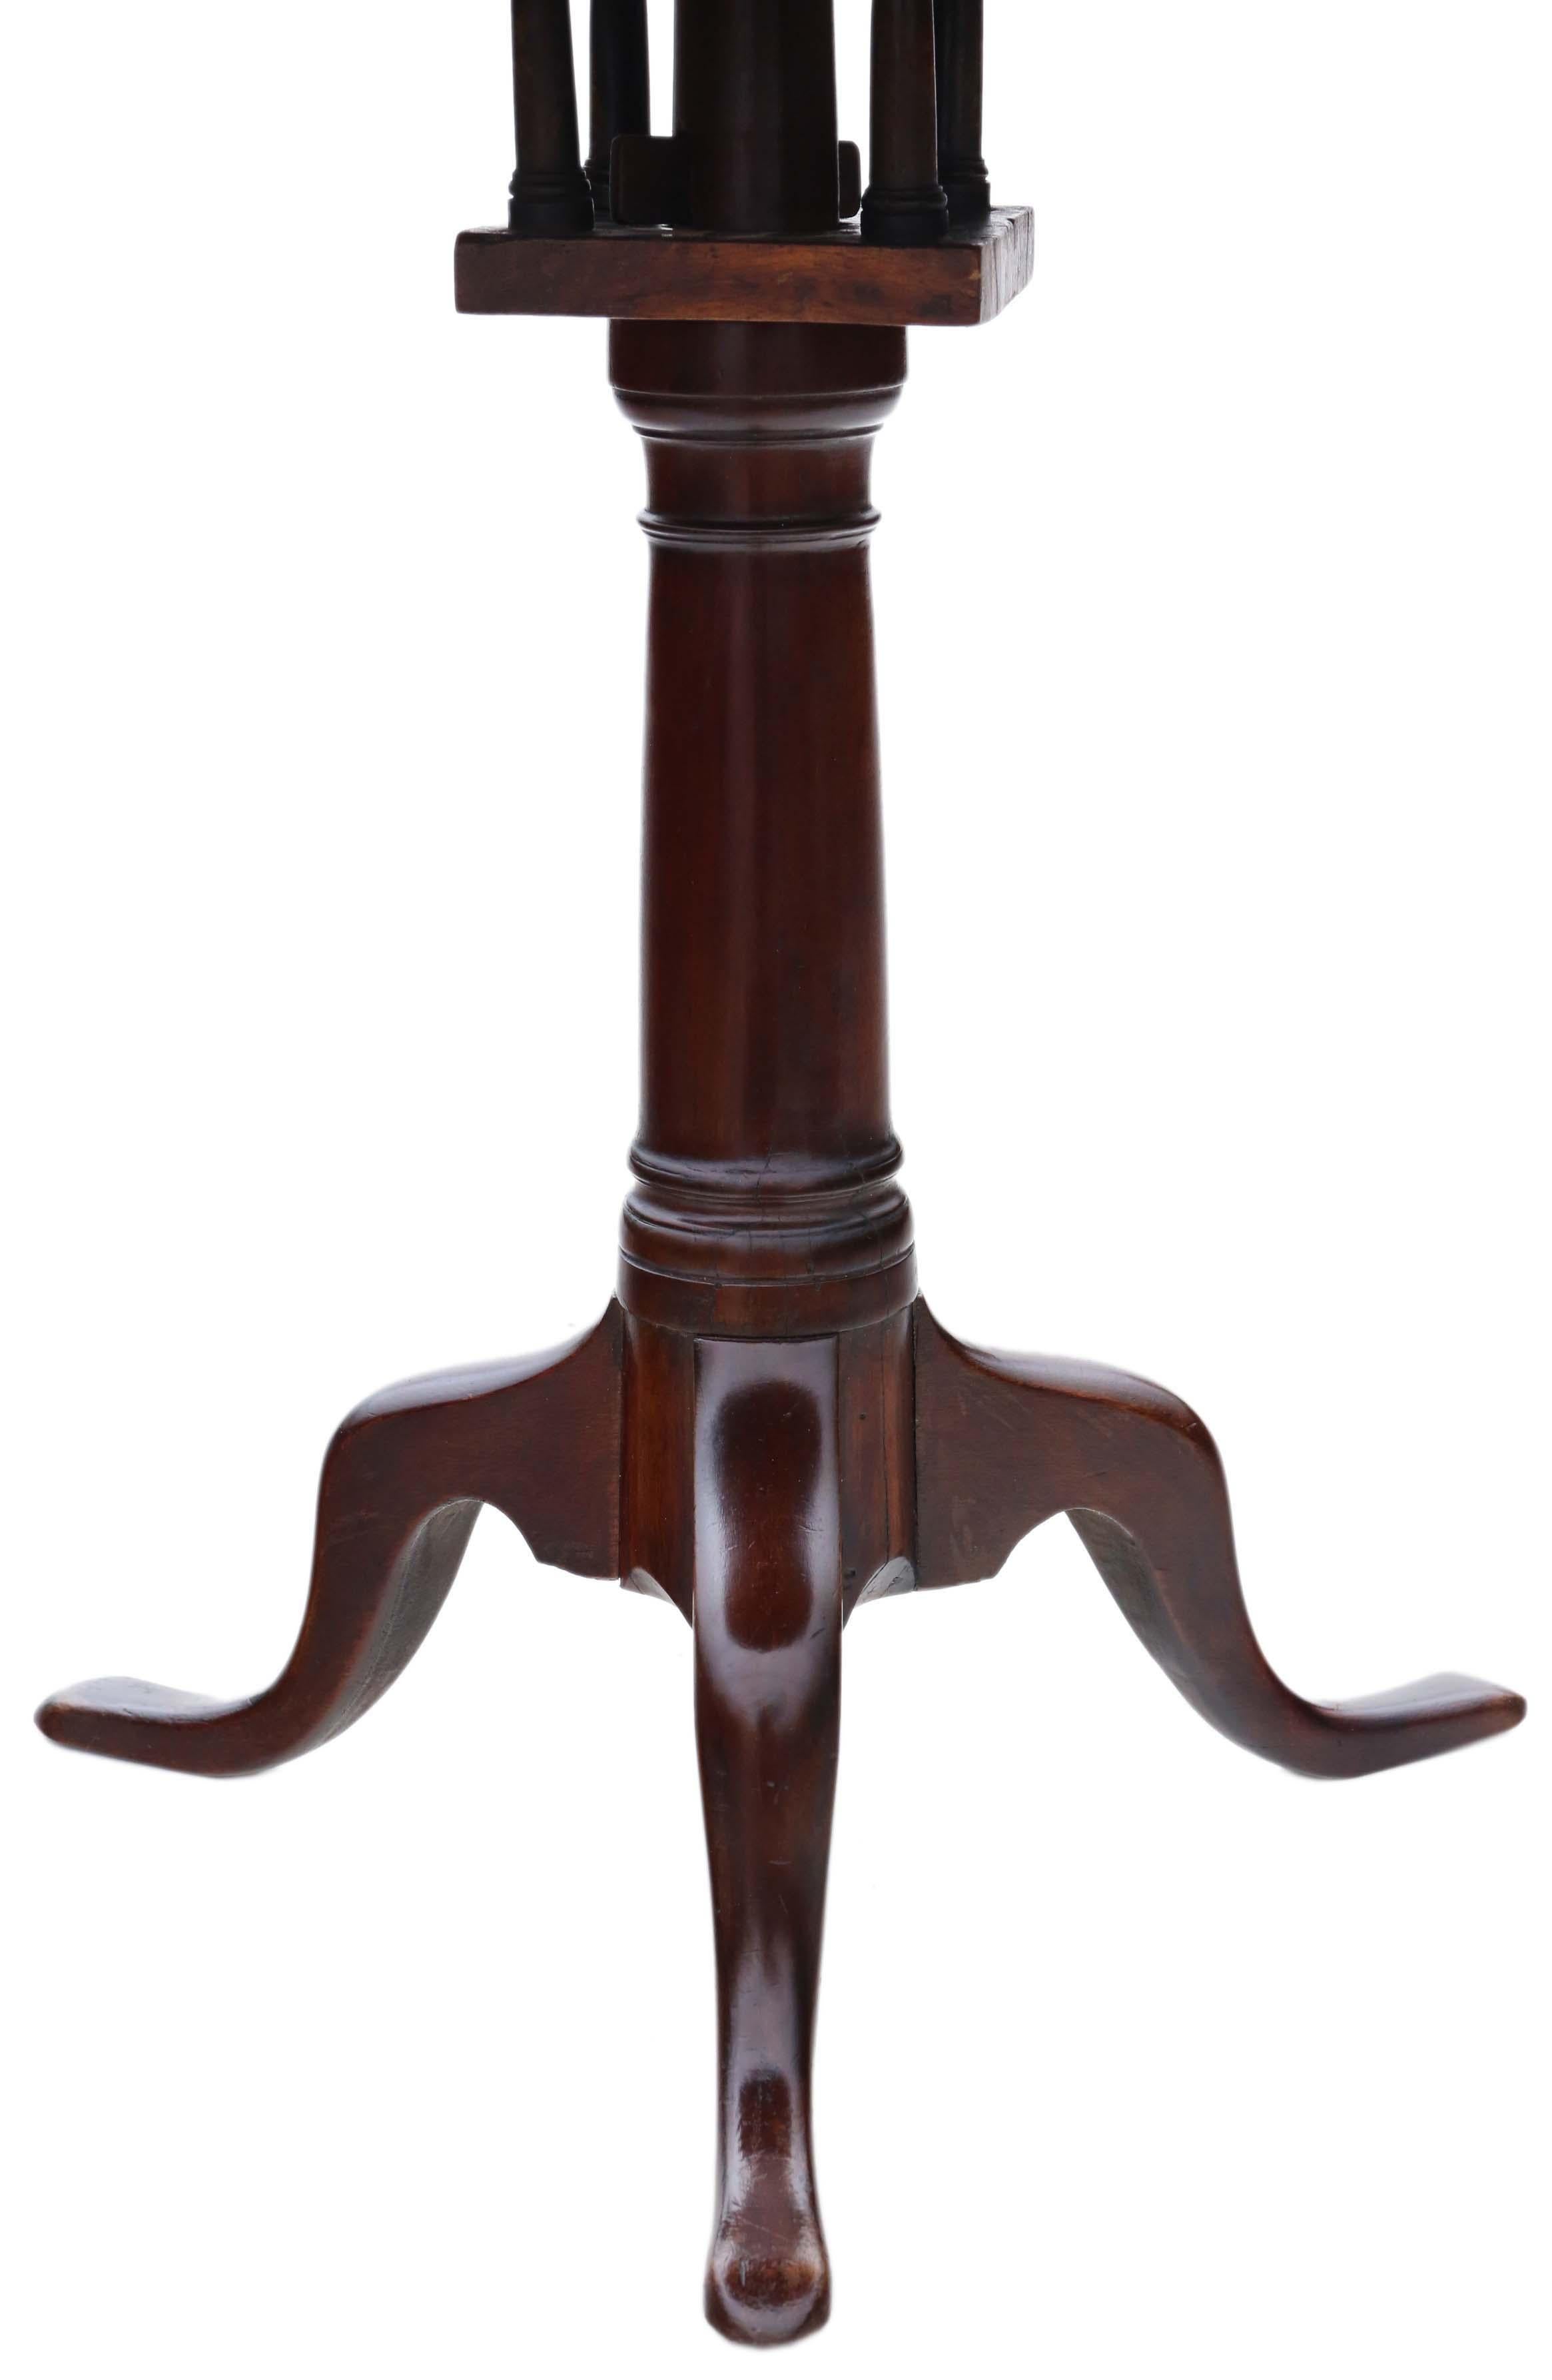 English 18th Century Georgian Mahogany Tilt-Top Birdcage Supper Table for Side Wine For Sale